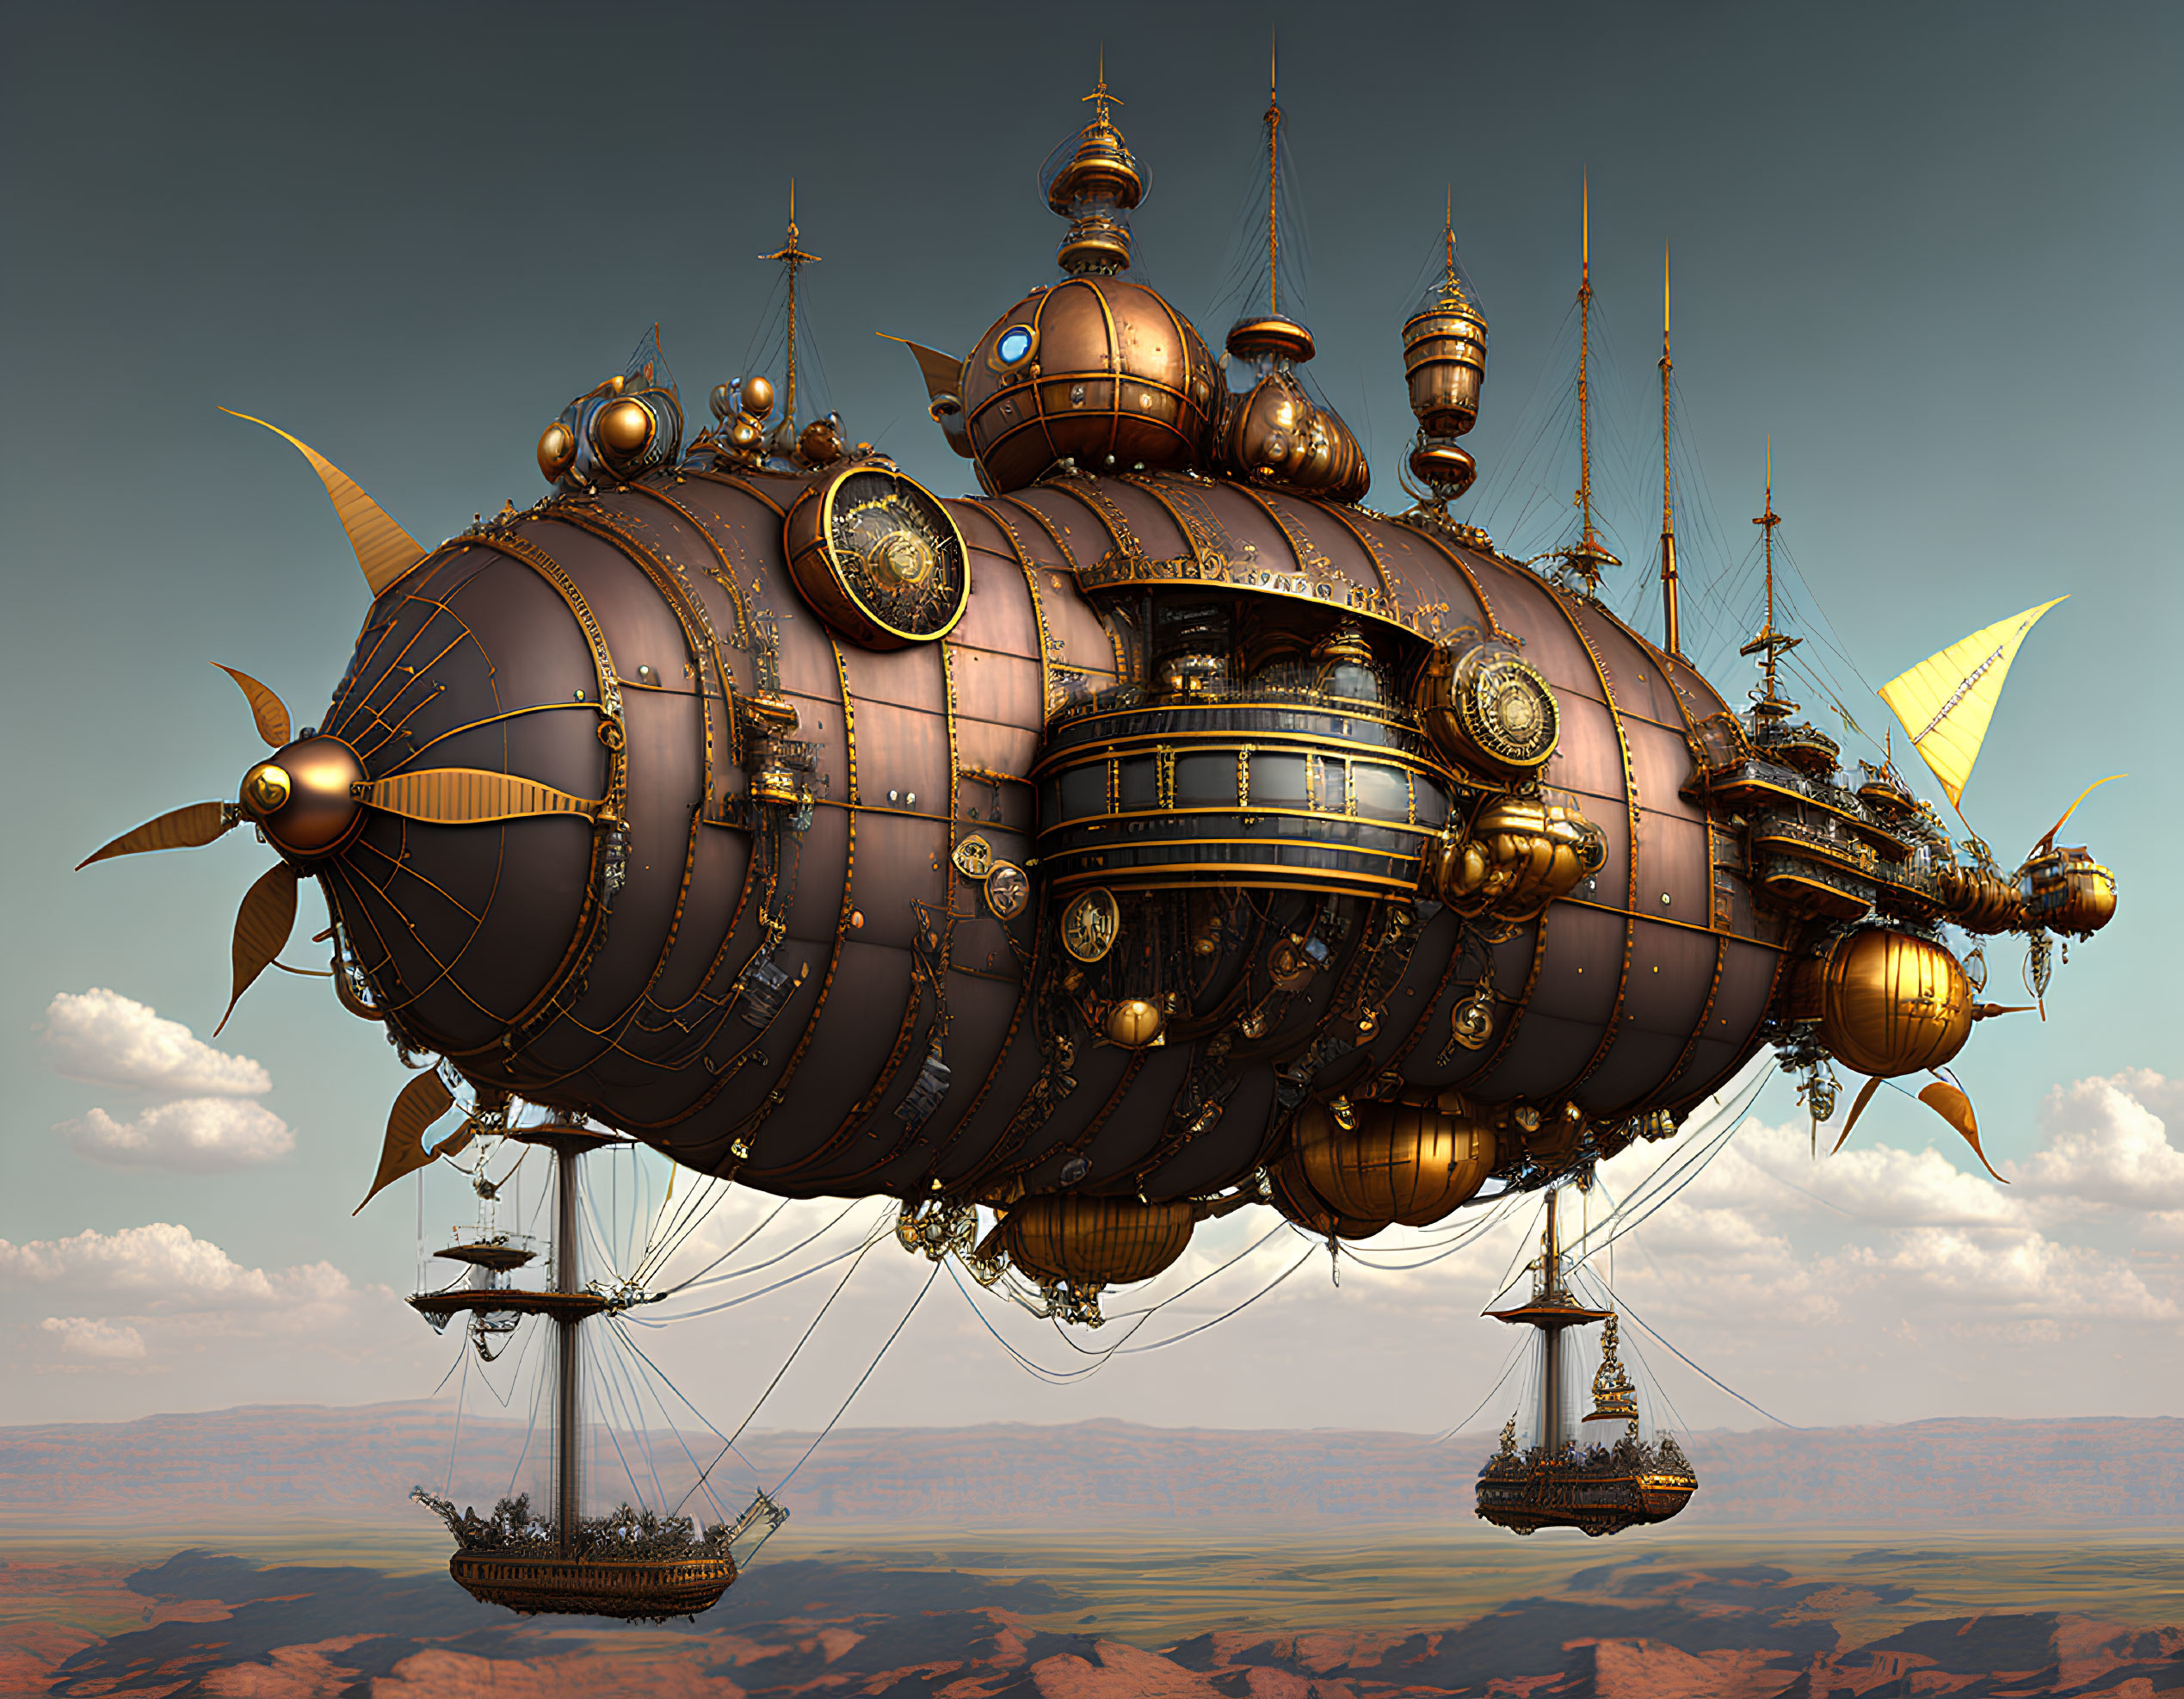 Intricate Steampunk Airship Flying Over Desert Landscape